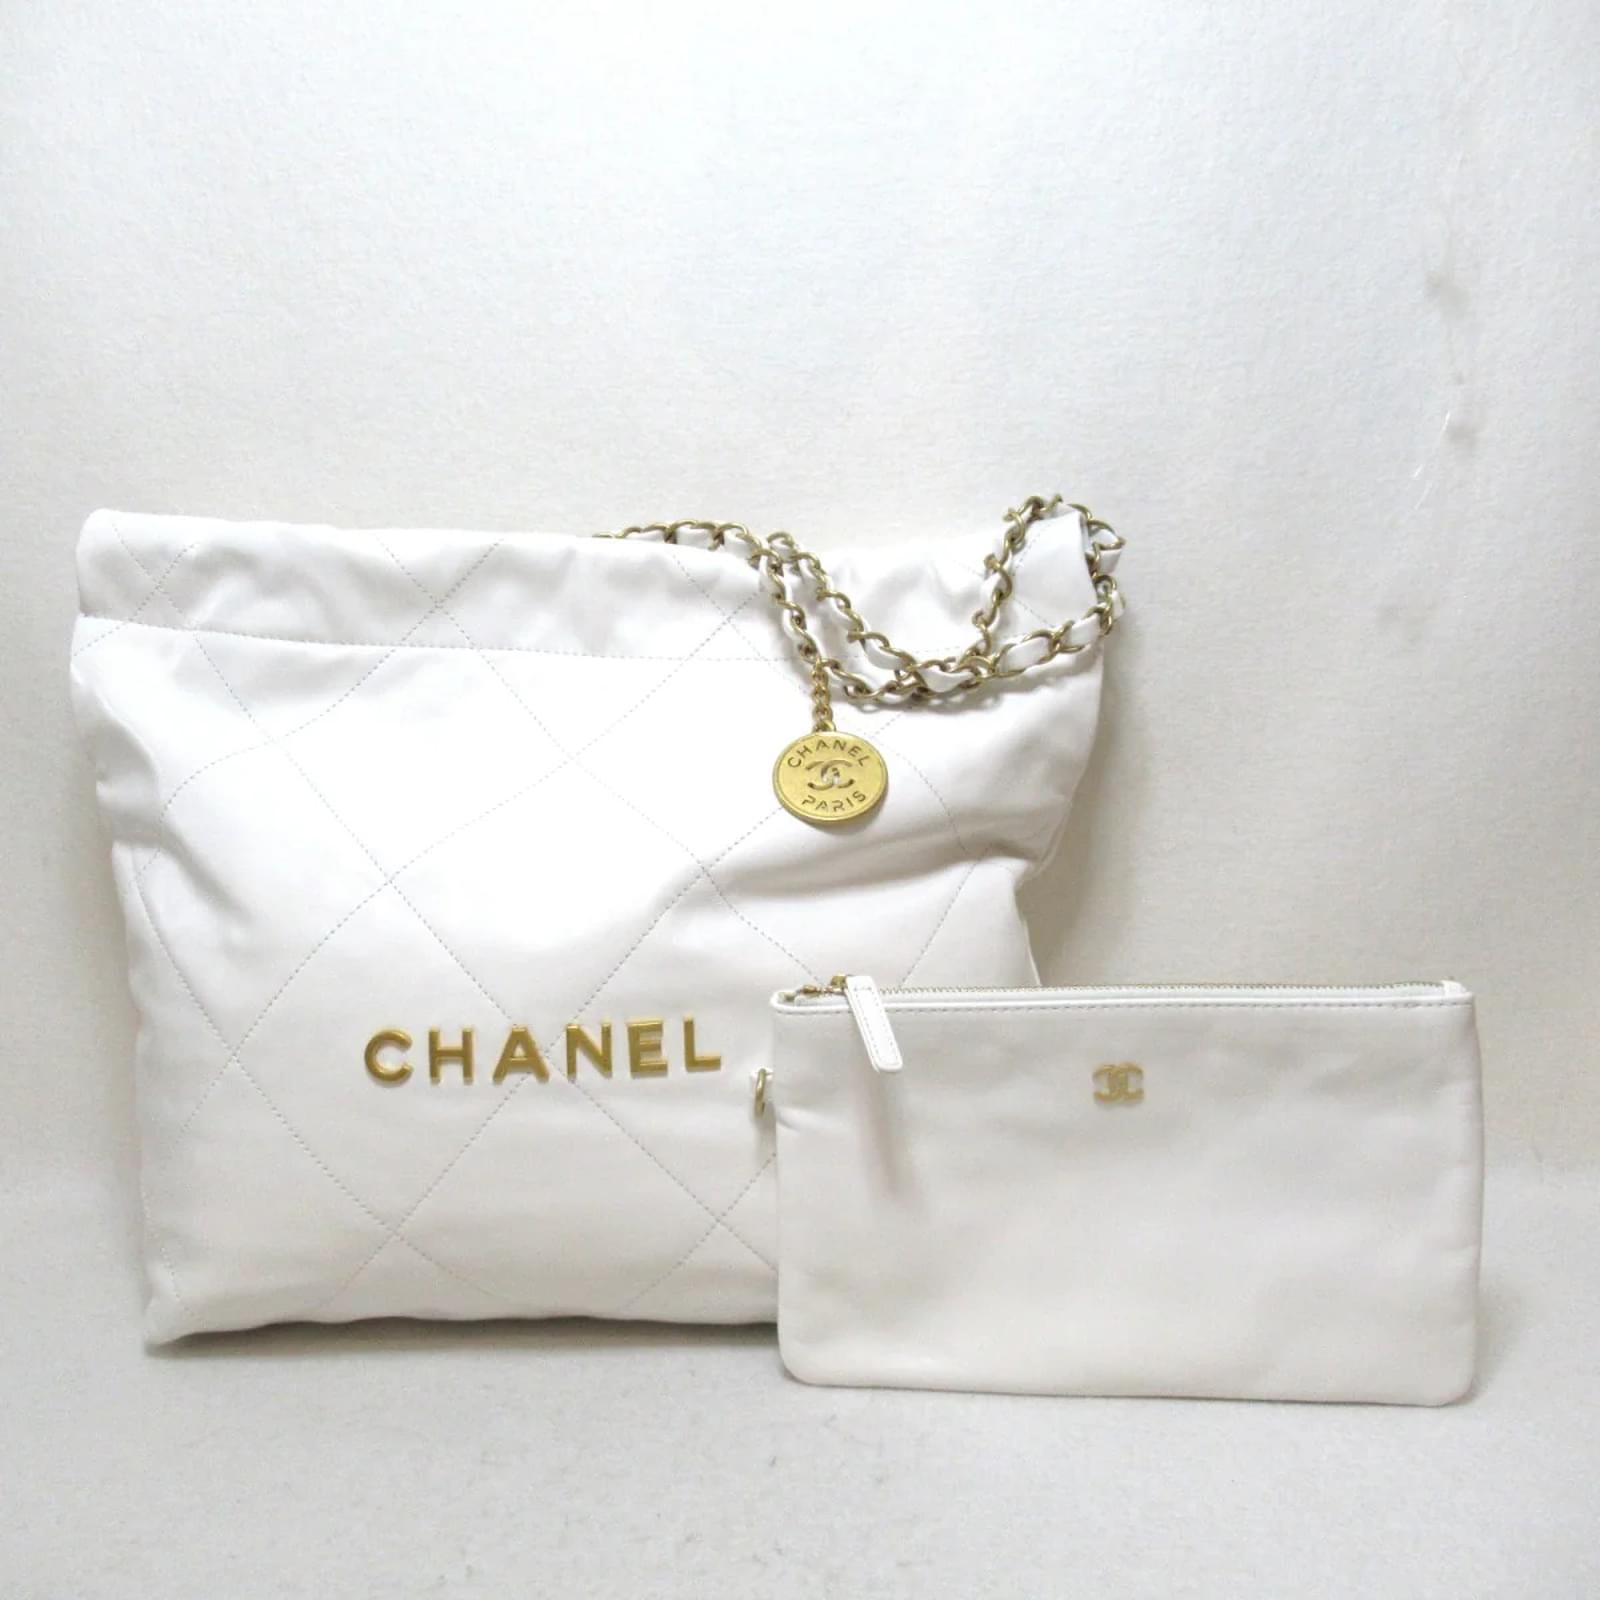 Chanel White Leather Large 22 Hobo Bag Chanel